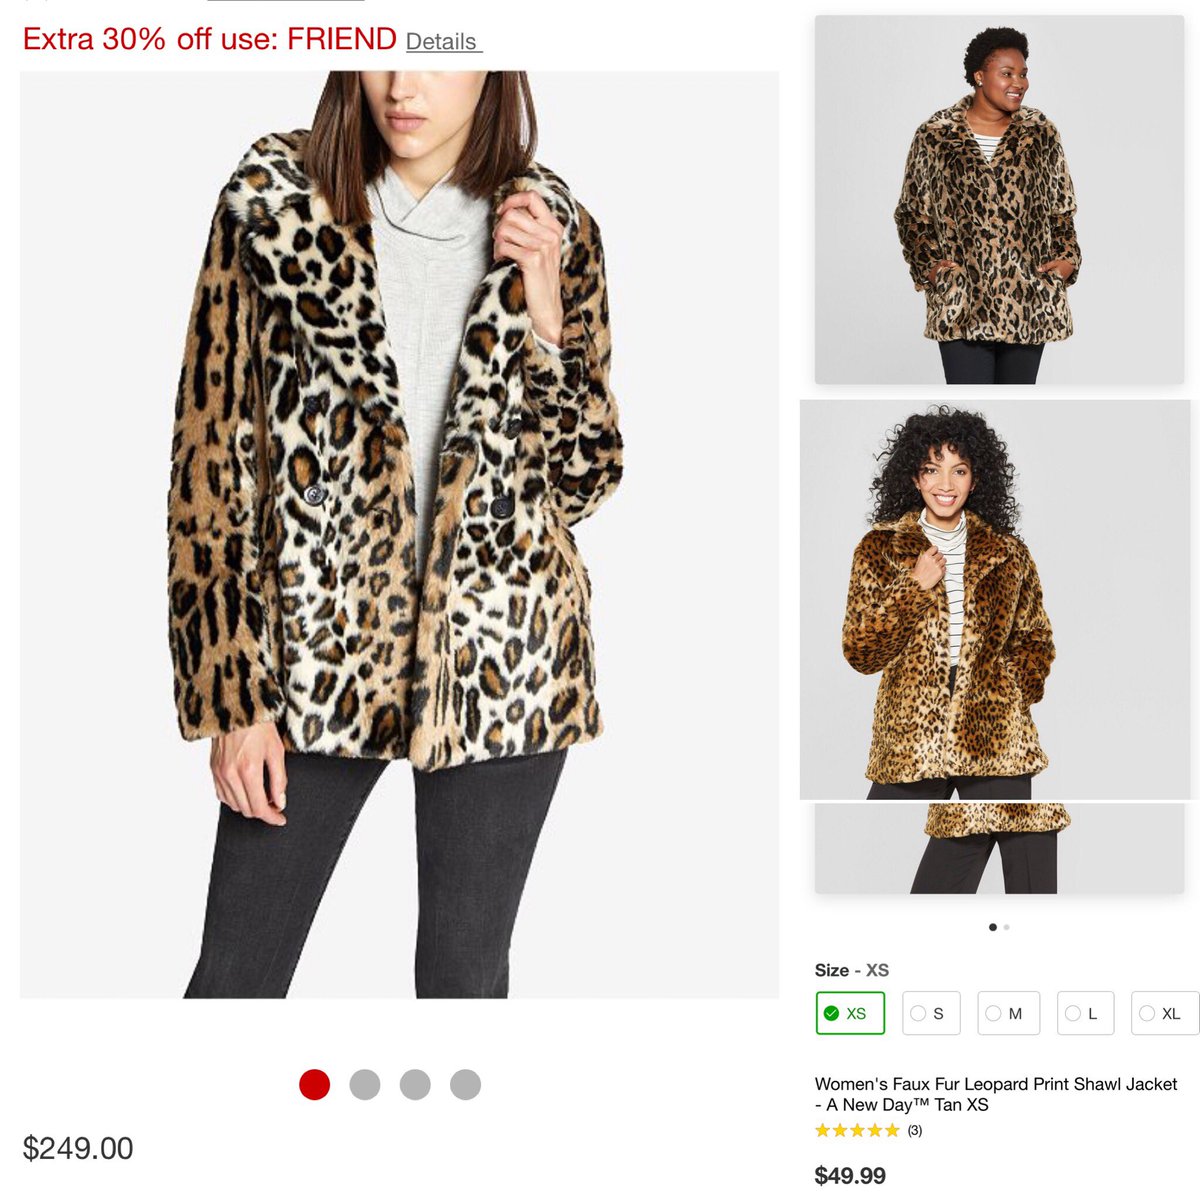 Leopard is totally on trend, as long as it’s faux! Found this coat at Macy’s for $249 😳😳! @Target has it for just $50 to $60! Why pay more?! #lookforless #fashionforless #designerforless #anewday #avaandviv #targetstyle #target